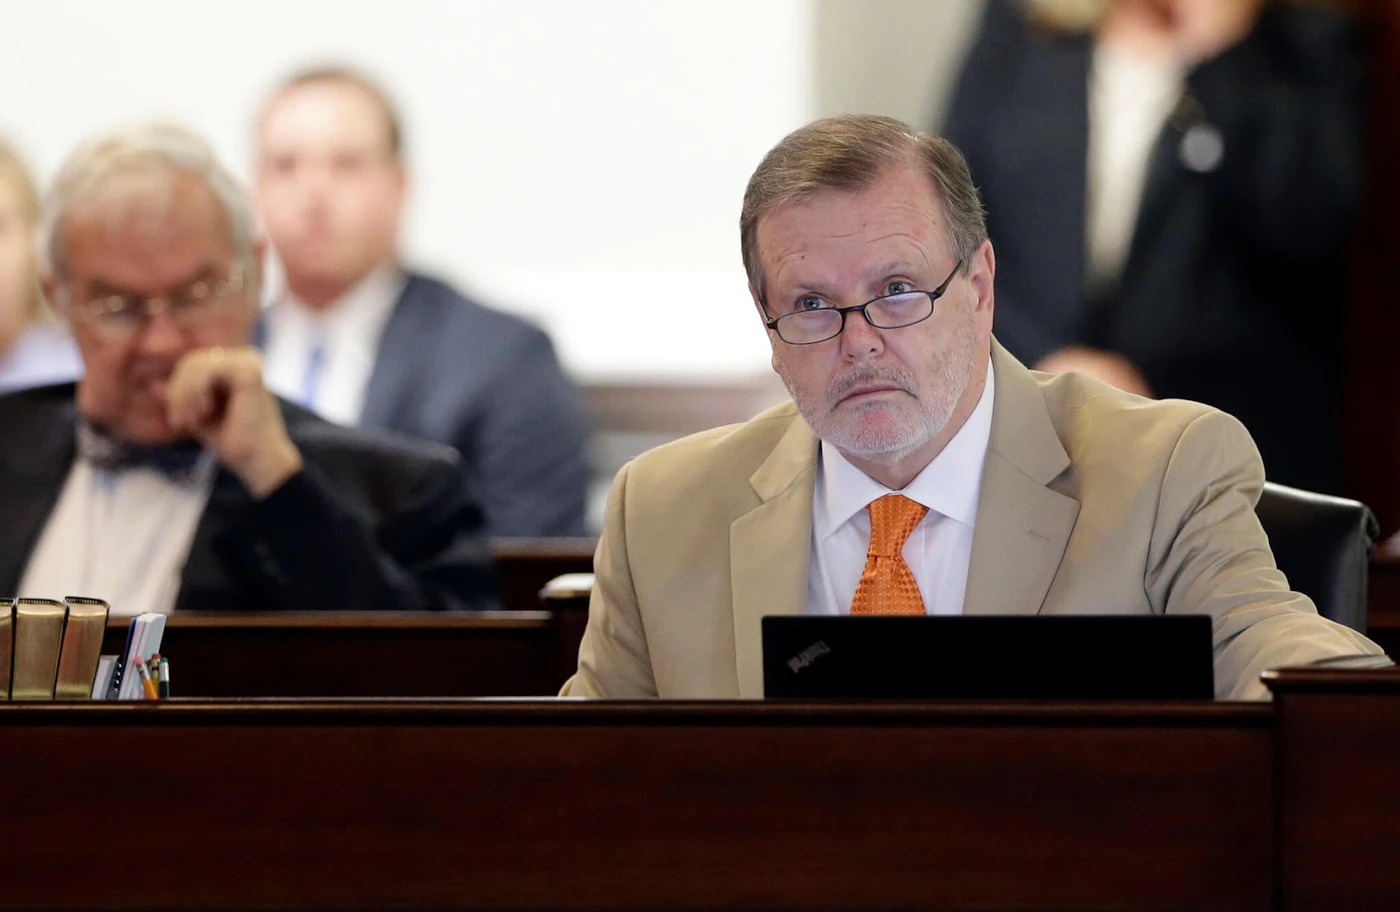 NC Senate leader Phil Berger in a 2016 file photo. A NC teacher says Berger and House Speaker Tim Moore have overseen a punishing decade for public education. She's calling on North Carolinians to vote as if their schools are at stake. (AP Photo/Gerry Broome)